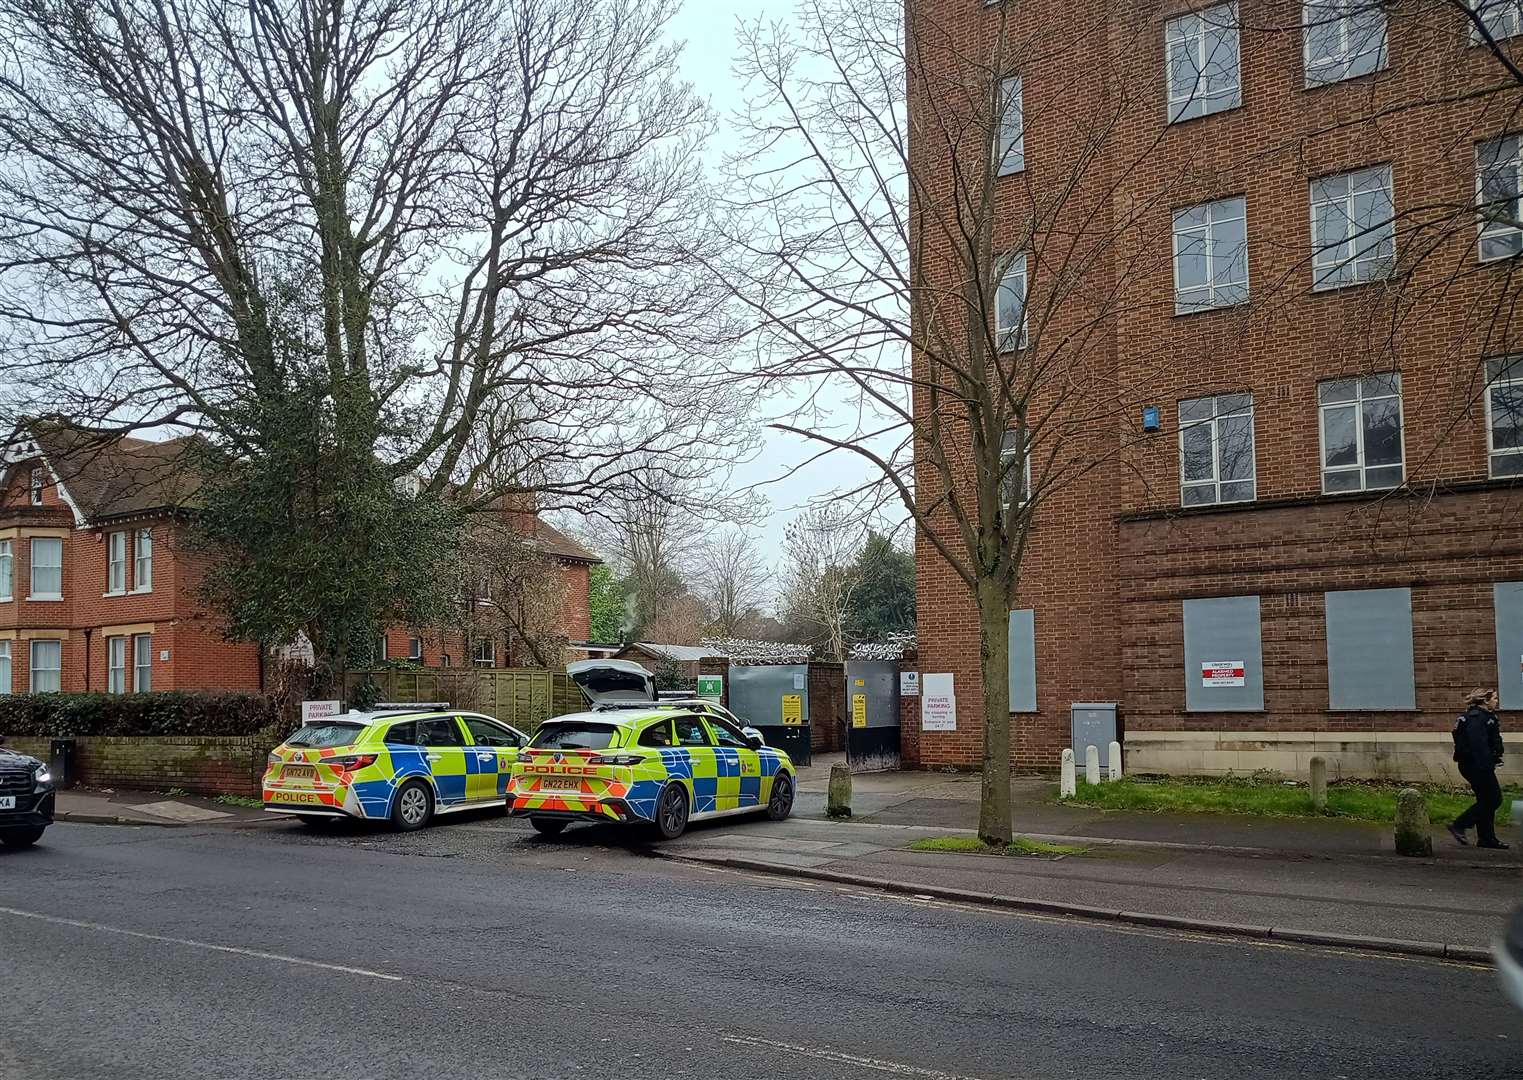 The officers were responding to "someone acting suspiciously" at Beckets House in Canterbury